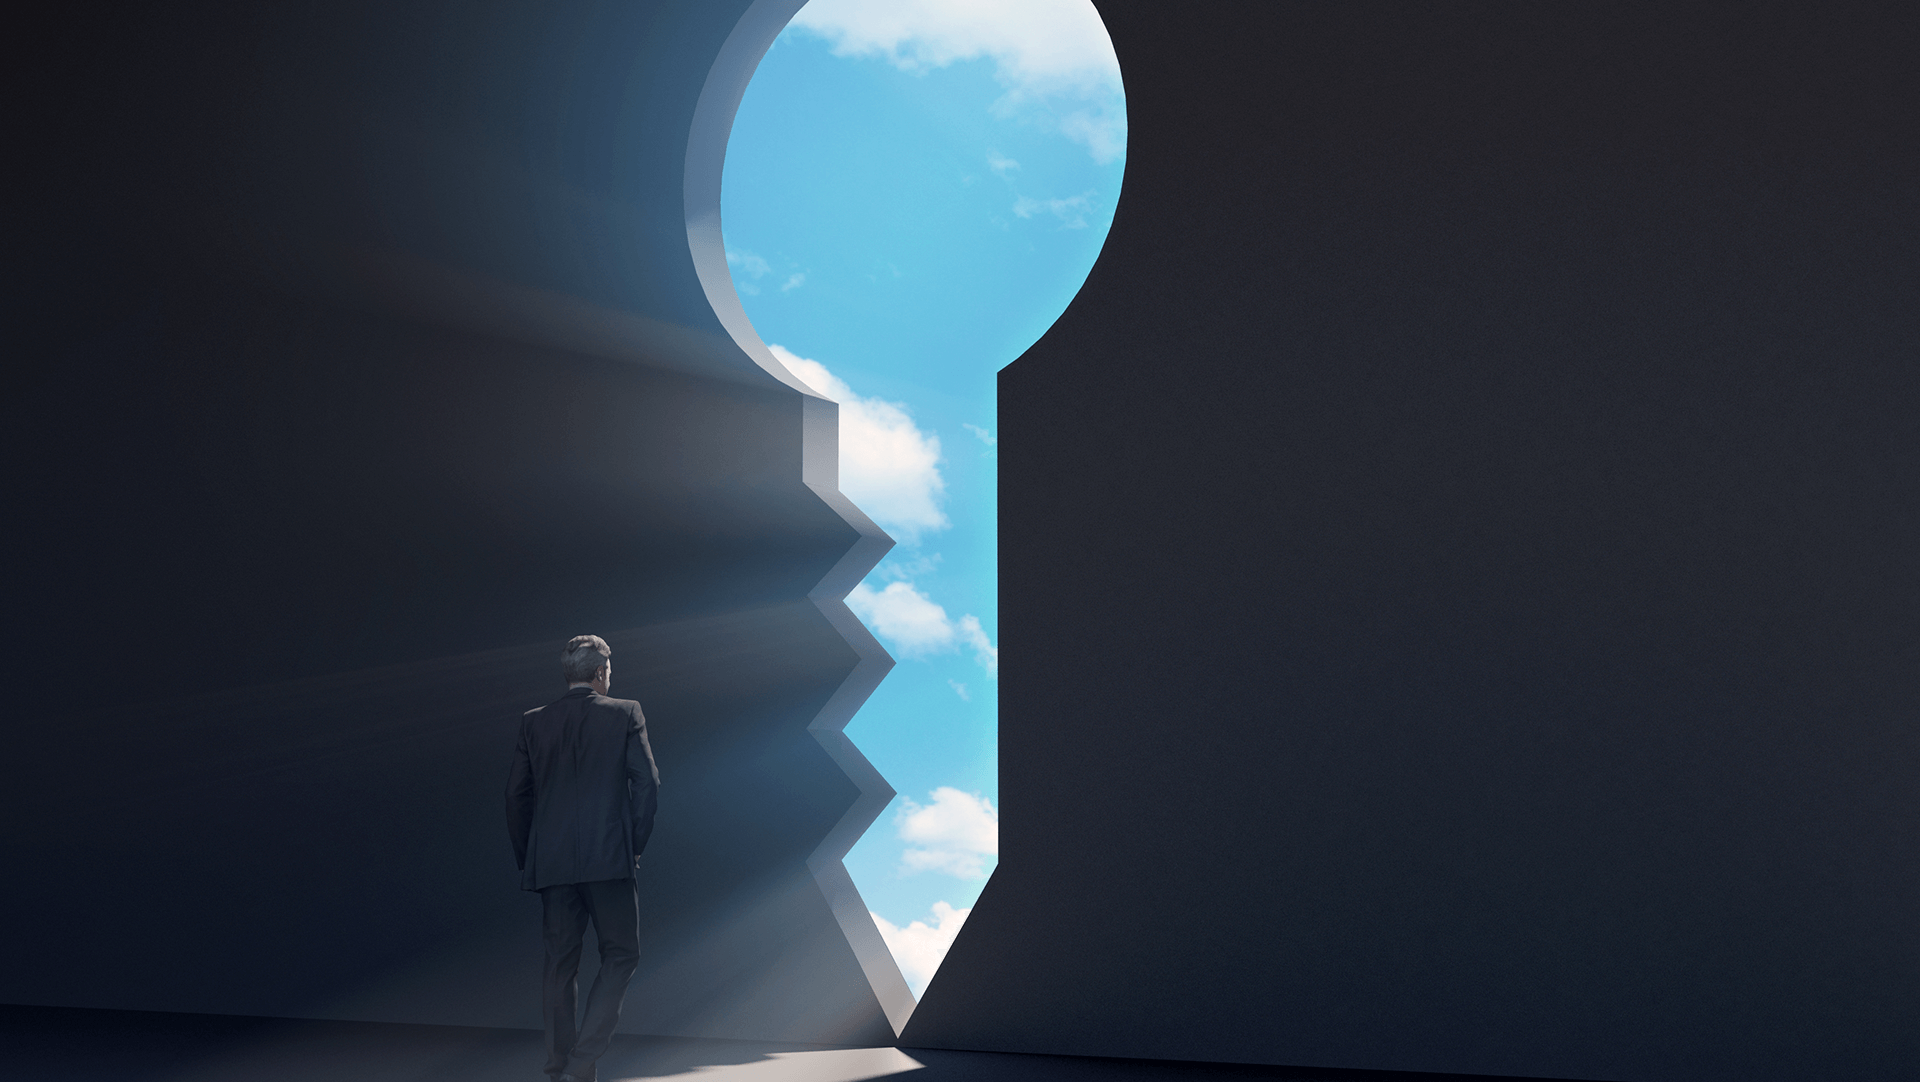 A businessman standing at the threshold of a giant keyhole-shaped doorway, looking out at the sky, symbolizing opportunity, discovery, and the unknown future.